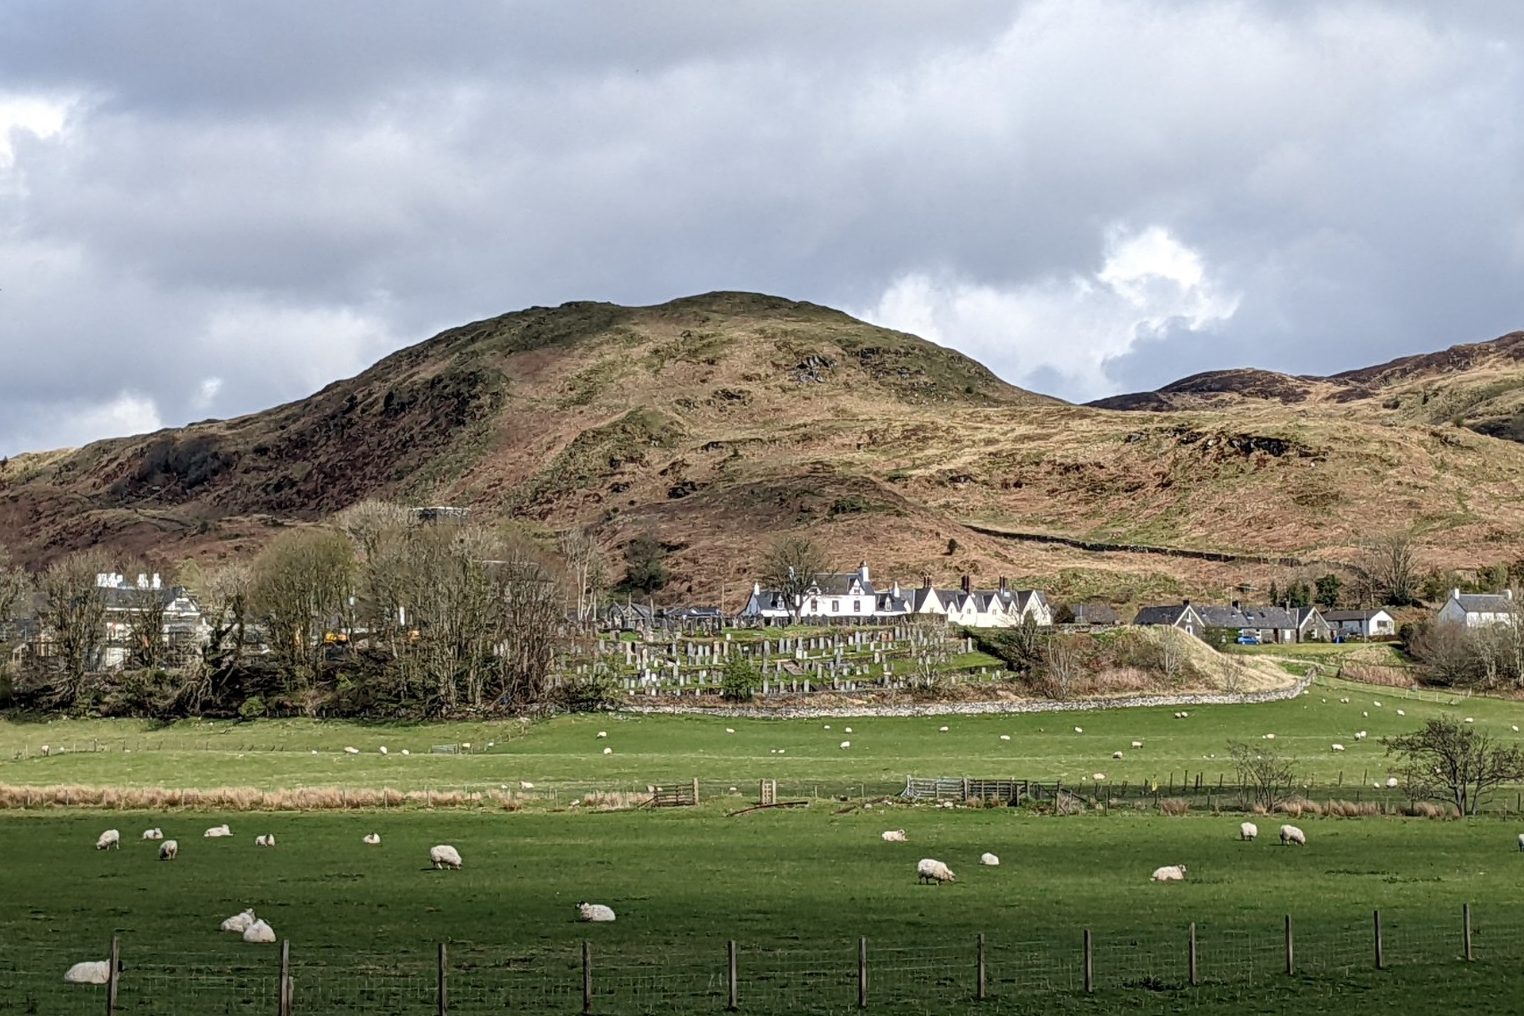 A small village punctuated by a stone church and white cottages stands on a natural earthen mound. Sheep graze green fields in the foreground, with bare hills rising immediately behind and above the village.